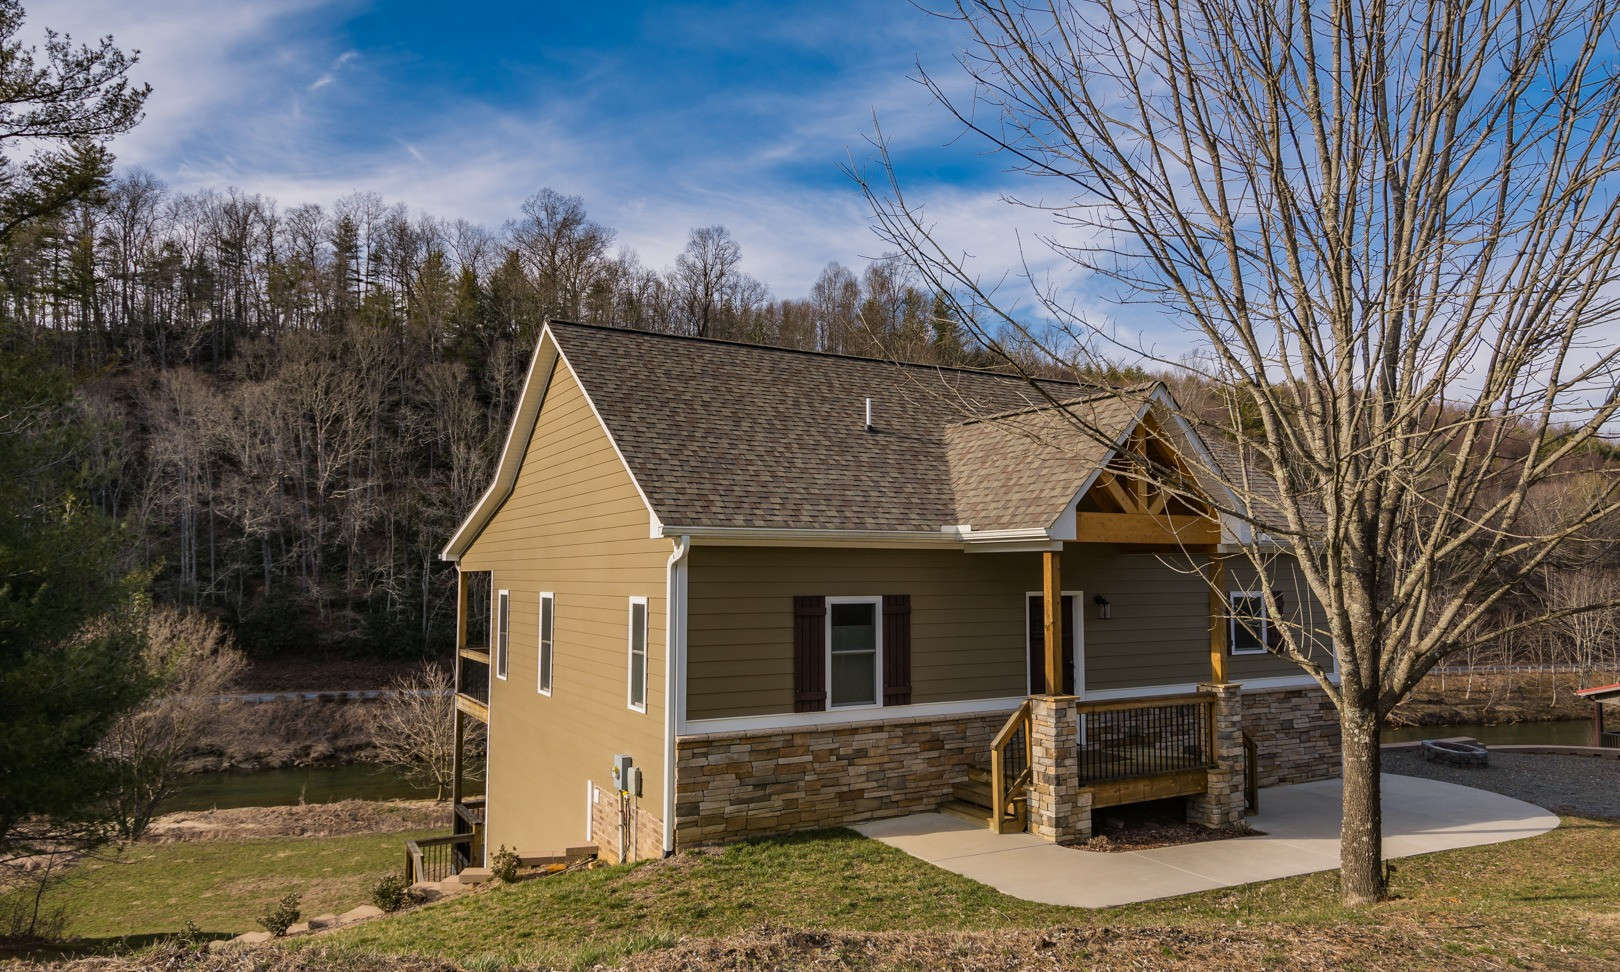 Mountain Craftsman Riverfront Home! Conveniently located between Boone and West Jefferson on a 2.25 acre setting in the well established community of Green Meadow Estates, this beautiful custom-built 3-bedroom, 2.5-bath "Southern Living" home offers many key features not to be missed.